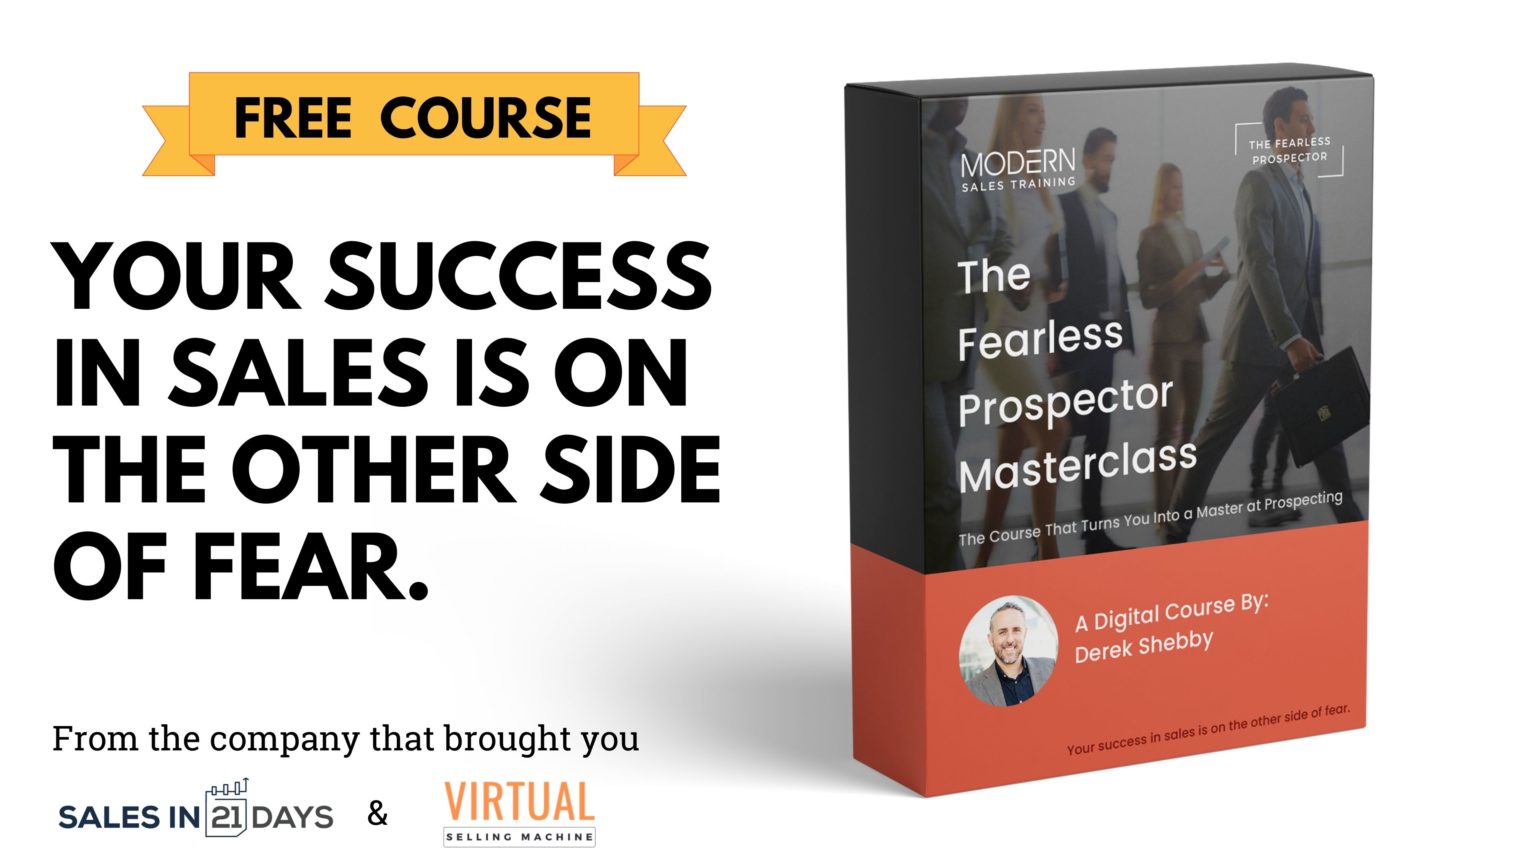 The Fearless Prospector Free Course